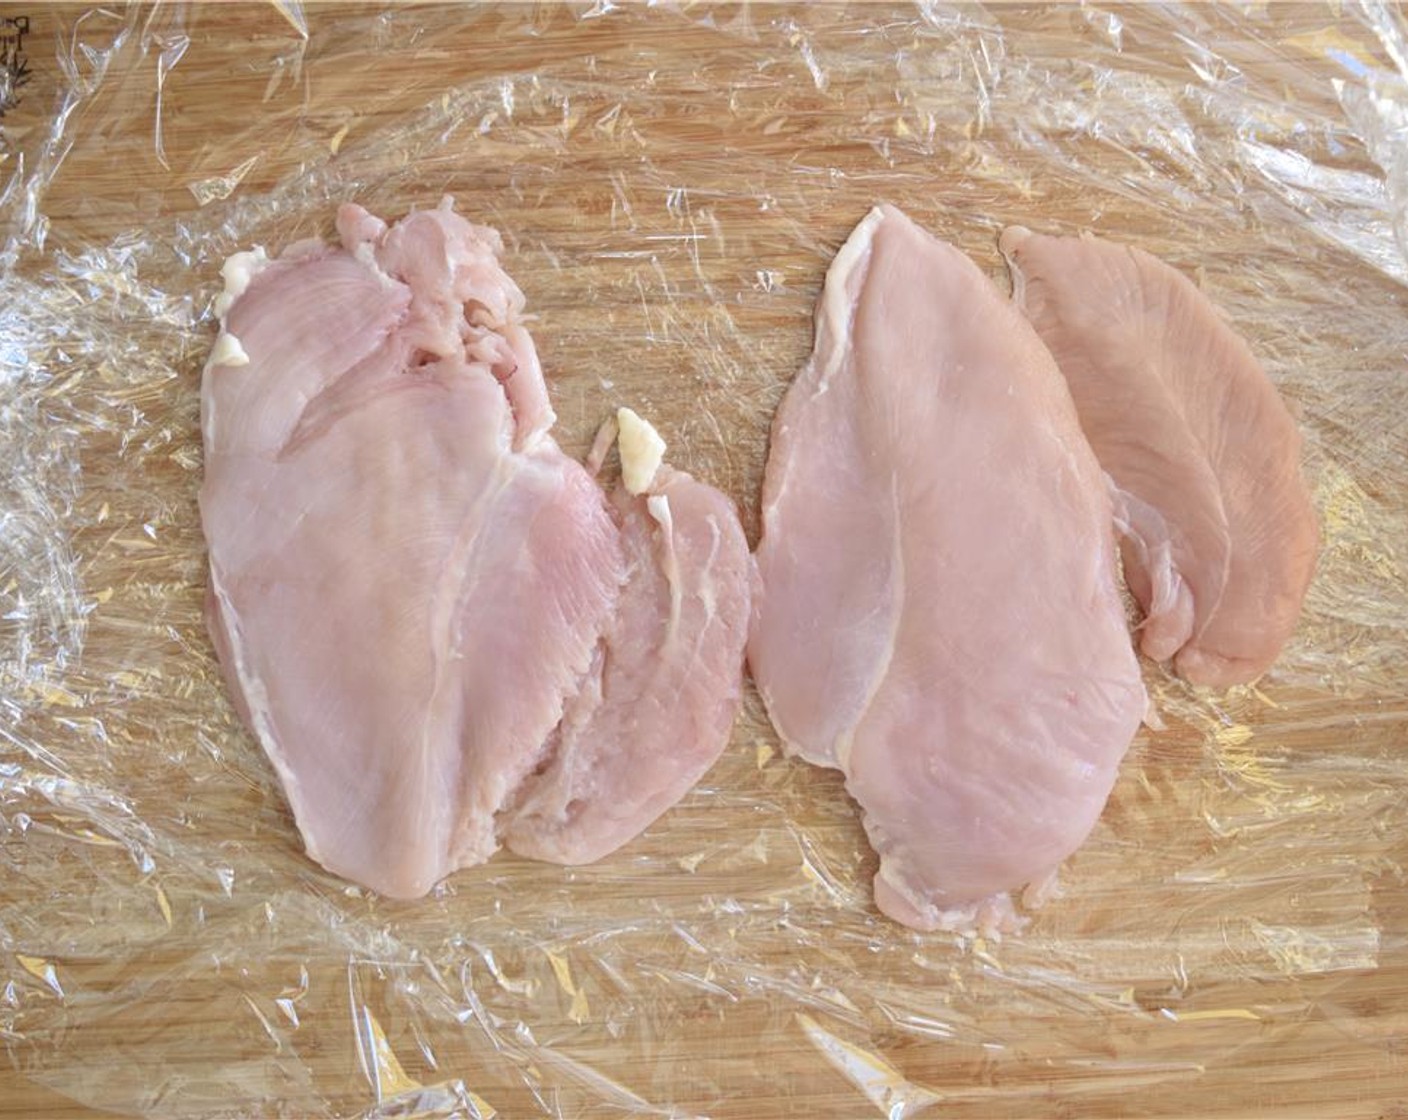 step 5 Make a layer of plastic wrap on a flat surface. Place Boneless, Skinless Chicken Breasts (2) on the wrap. Then make another layer of plastic wrap on top of the chicken. Use a heavy pan (cast iron skillet) to hit the chicken breast and flatten to about a half-inch.